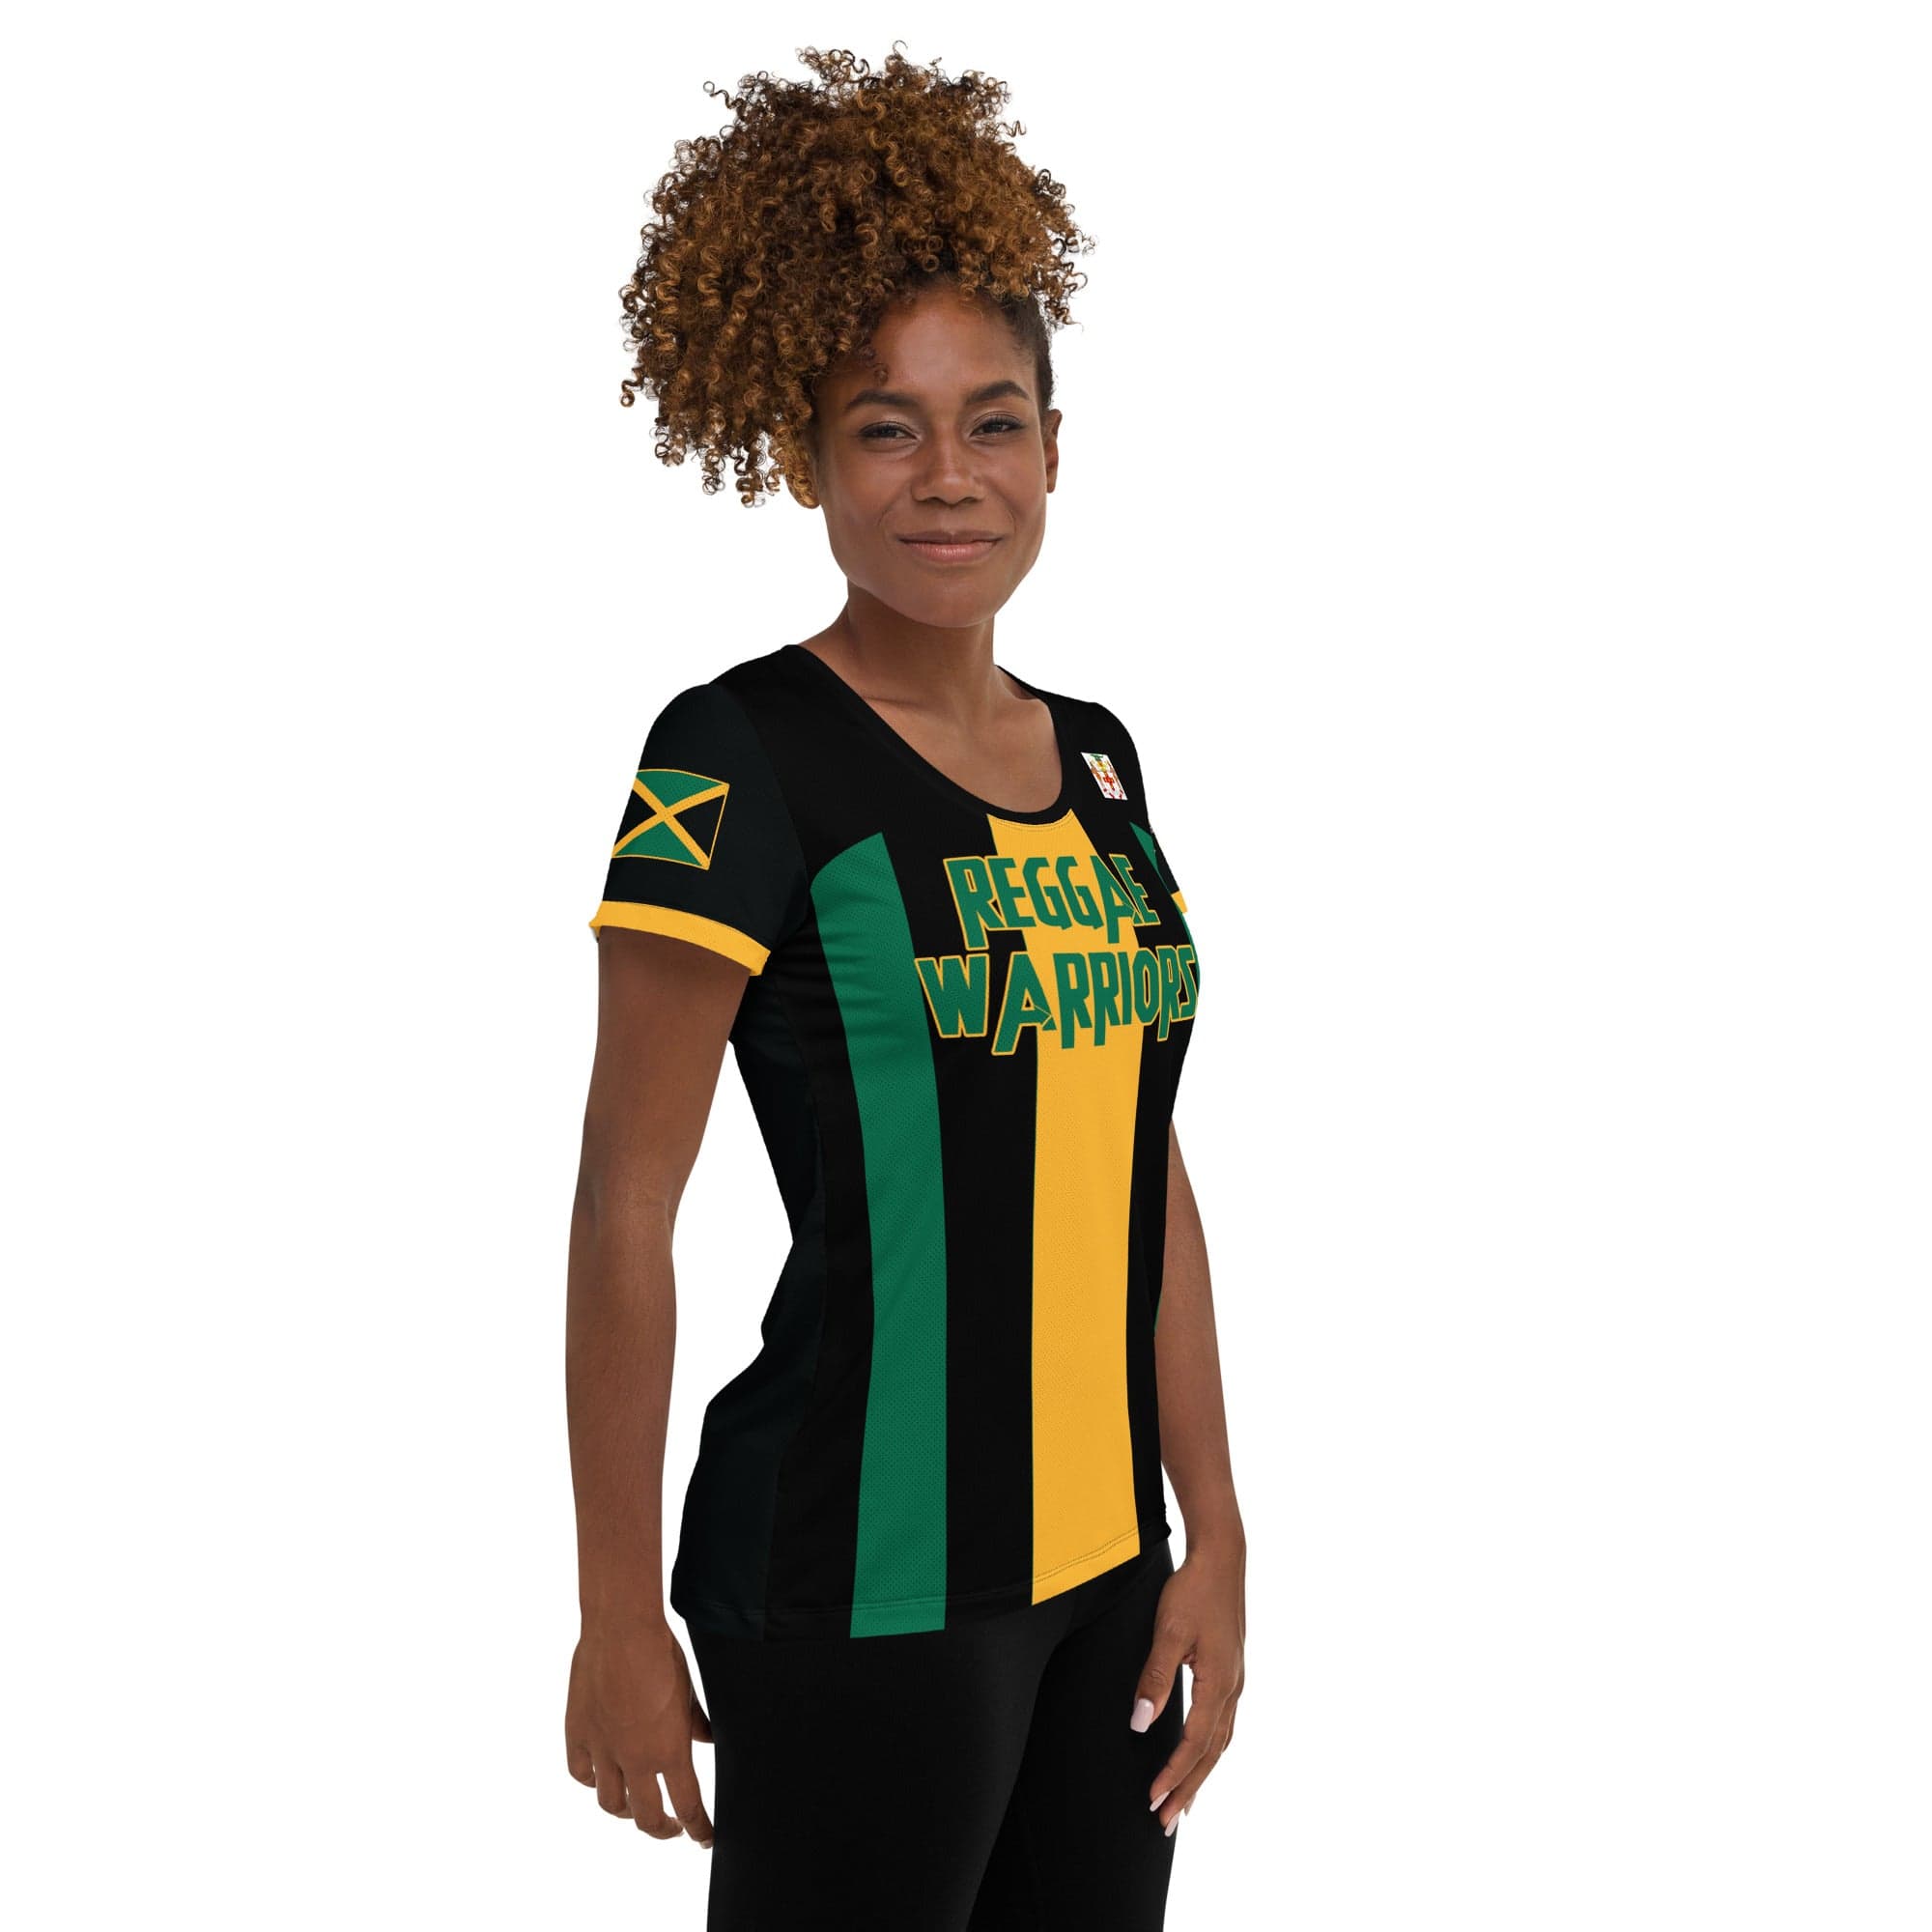 A Jamaica football women's shirt in Jamaica flag colors of green, black, and yellow showing the right side of a black woman.